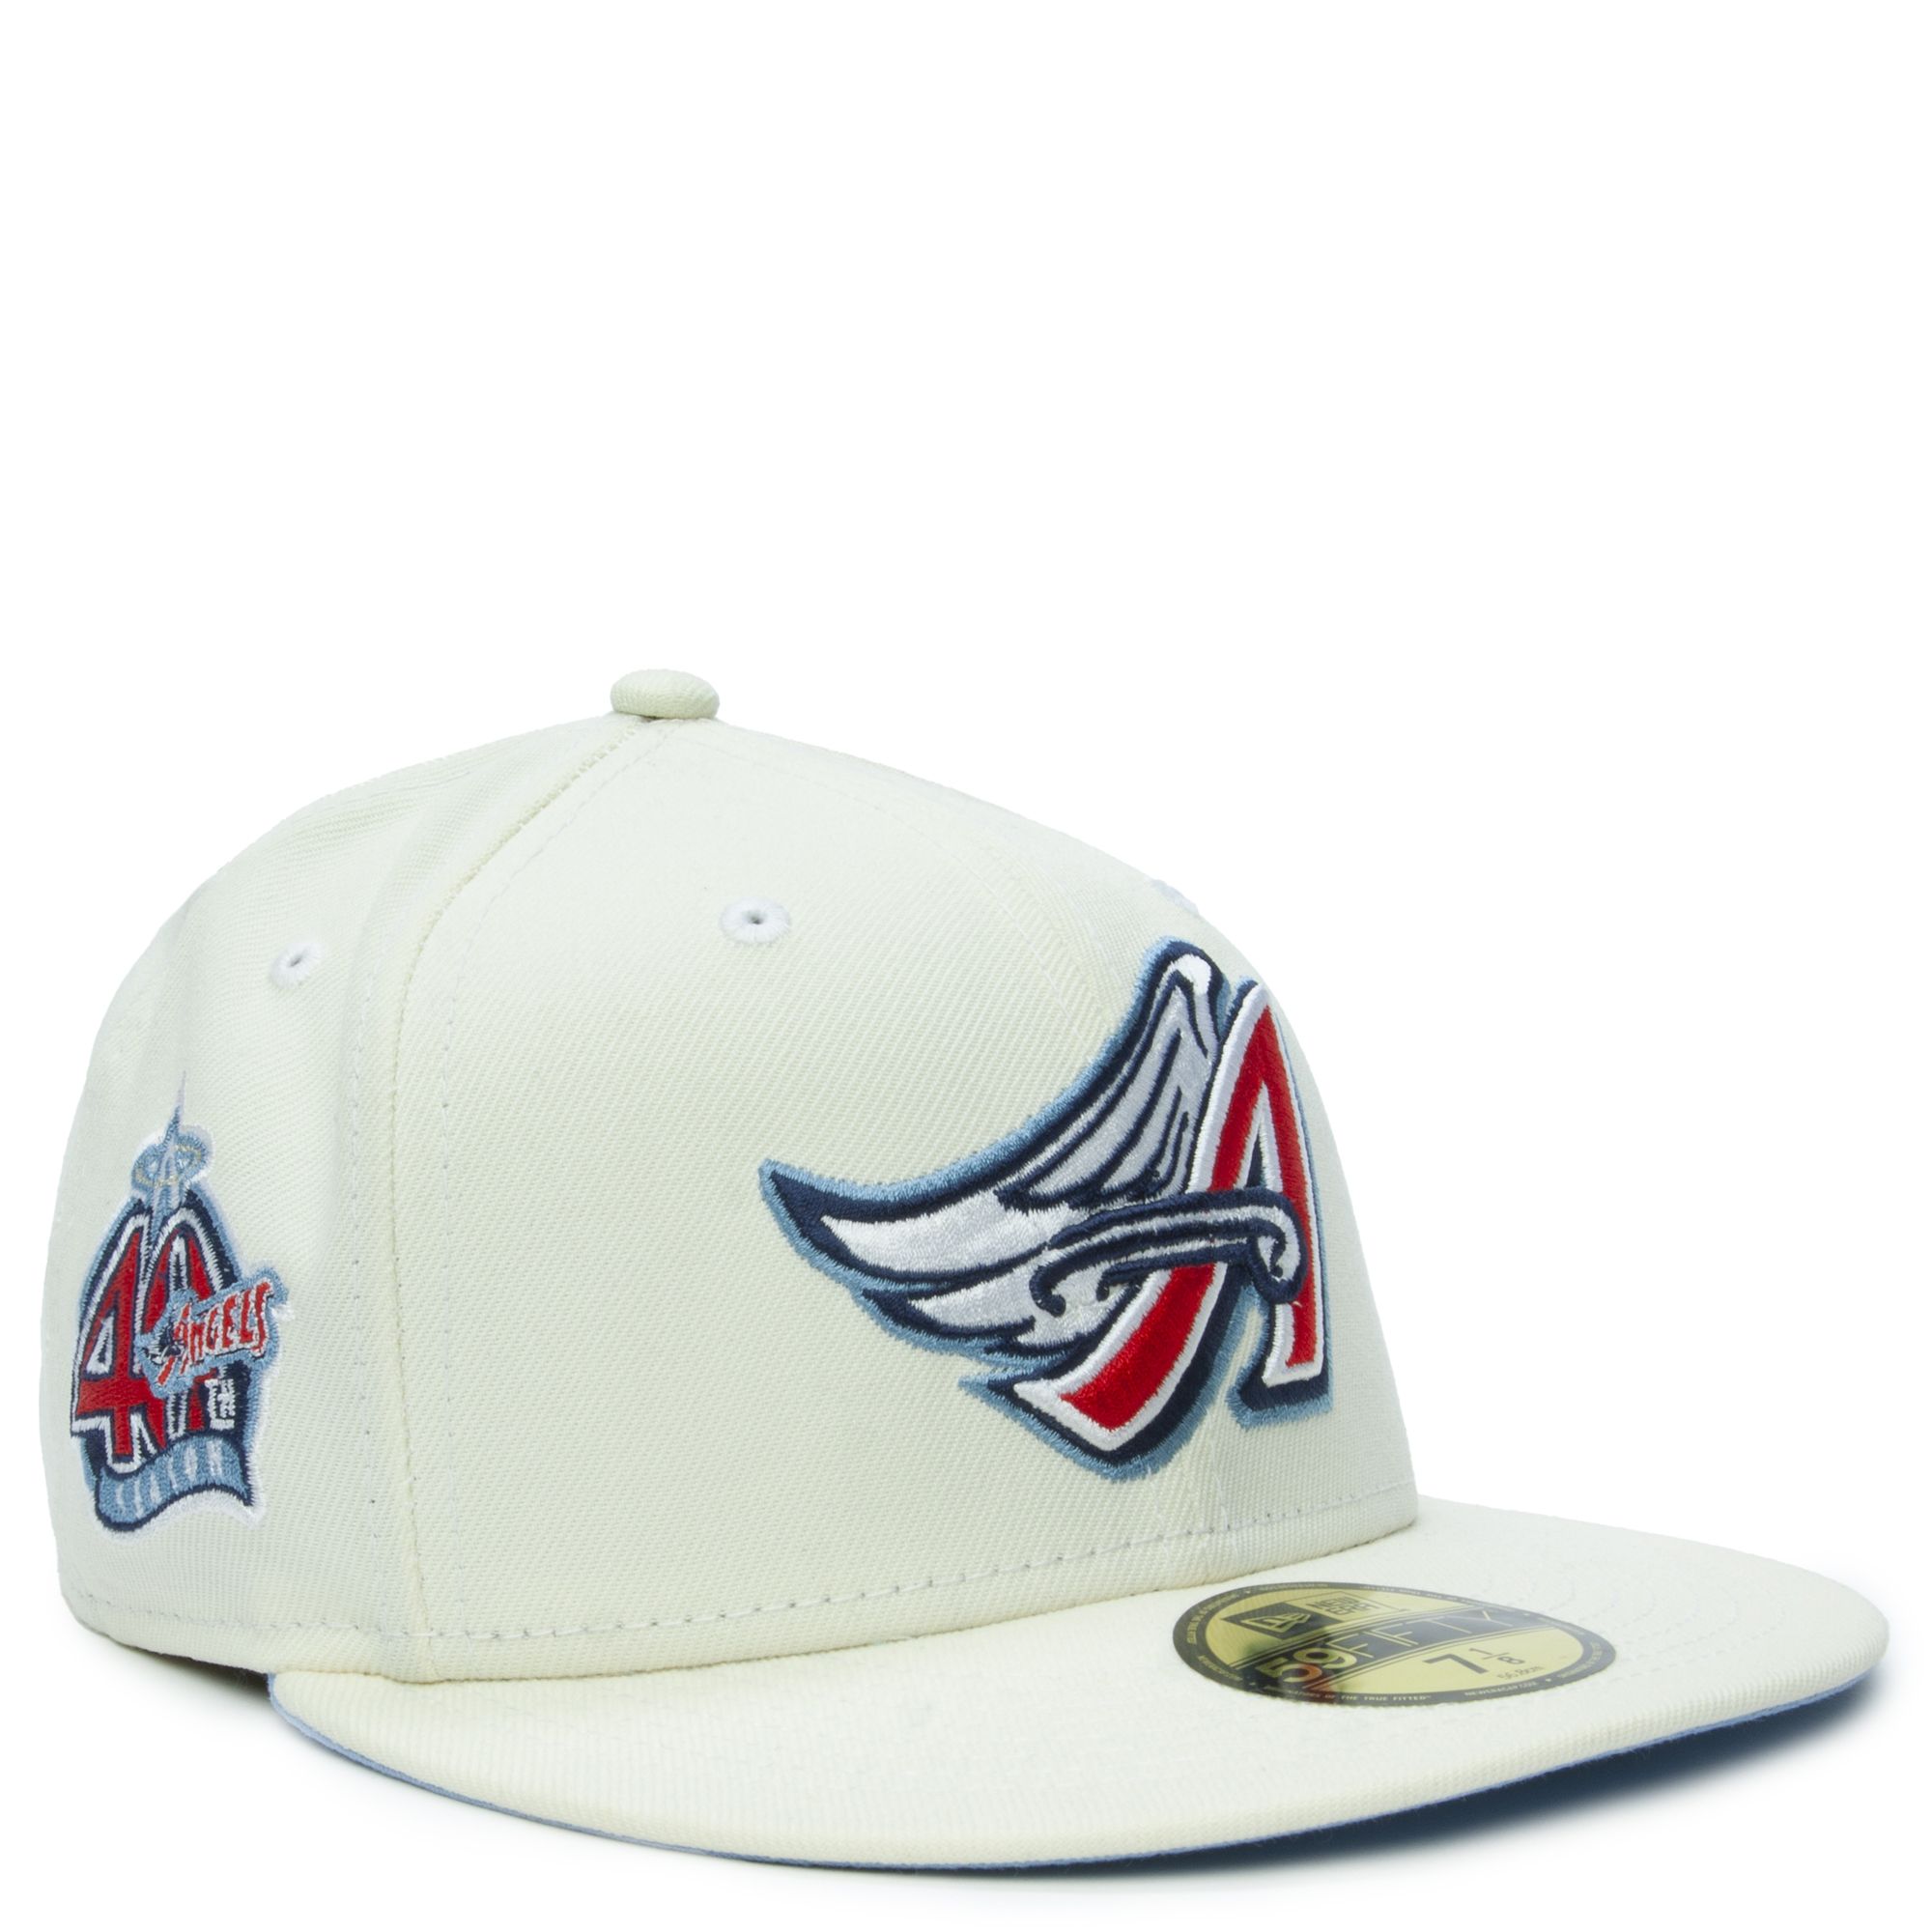 Anaheim Angels A City Connect New Era 59FIFTY Fitted Hat (Chrome White Black Red Under BRIM) 7 7/8